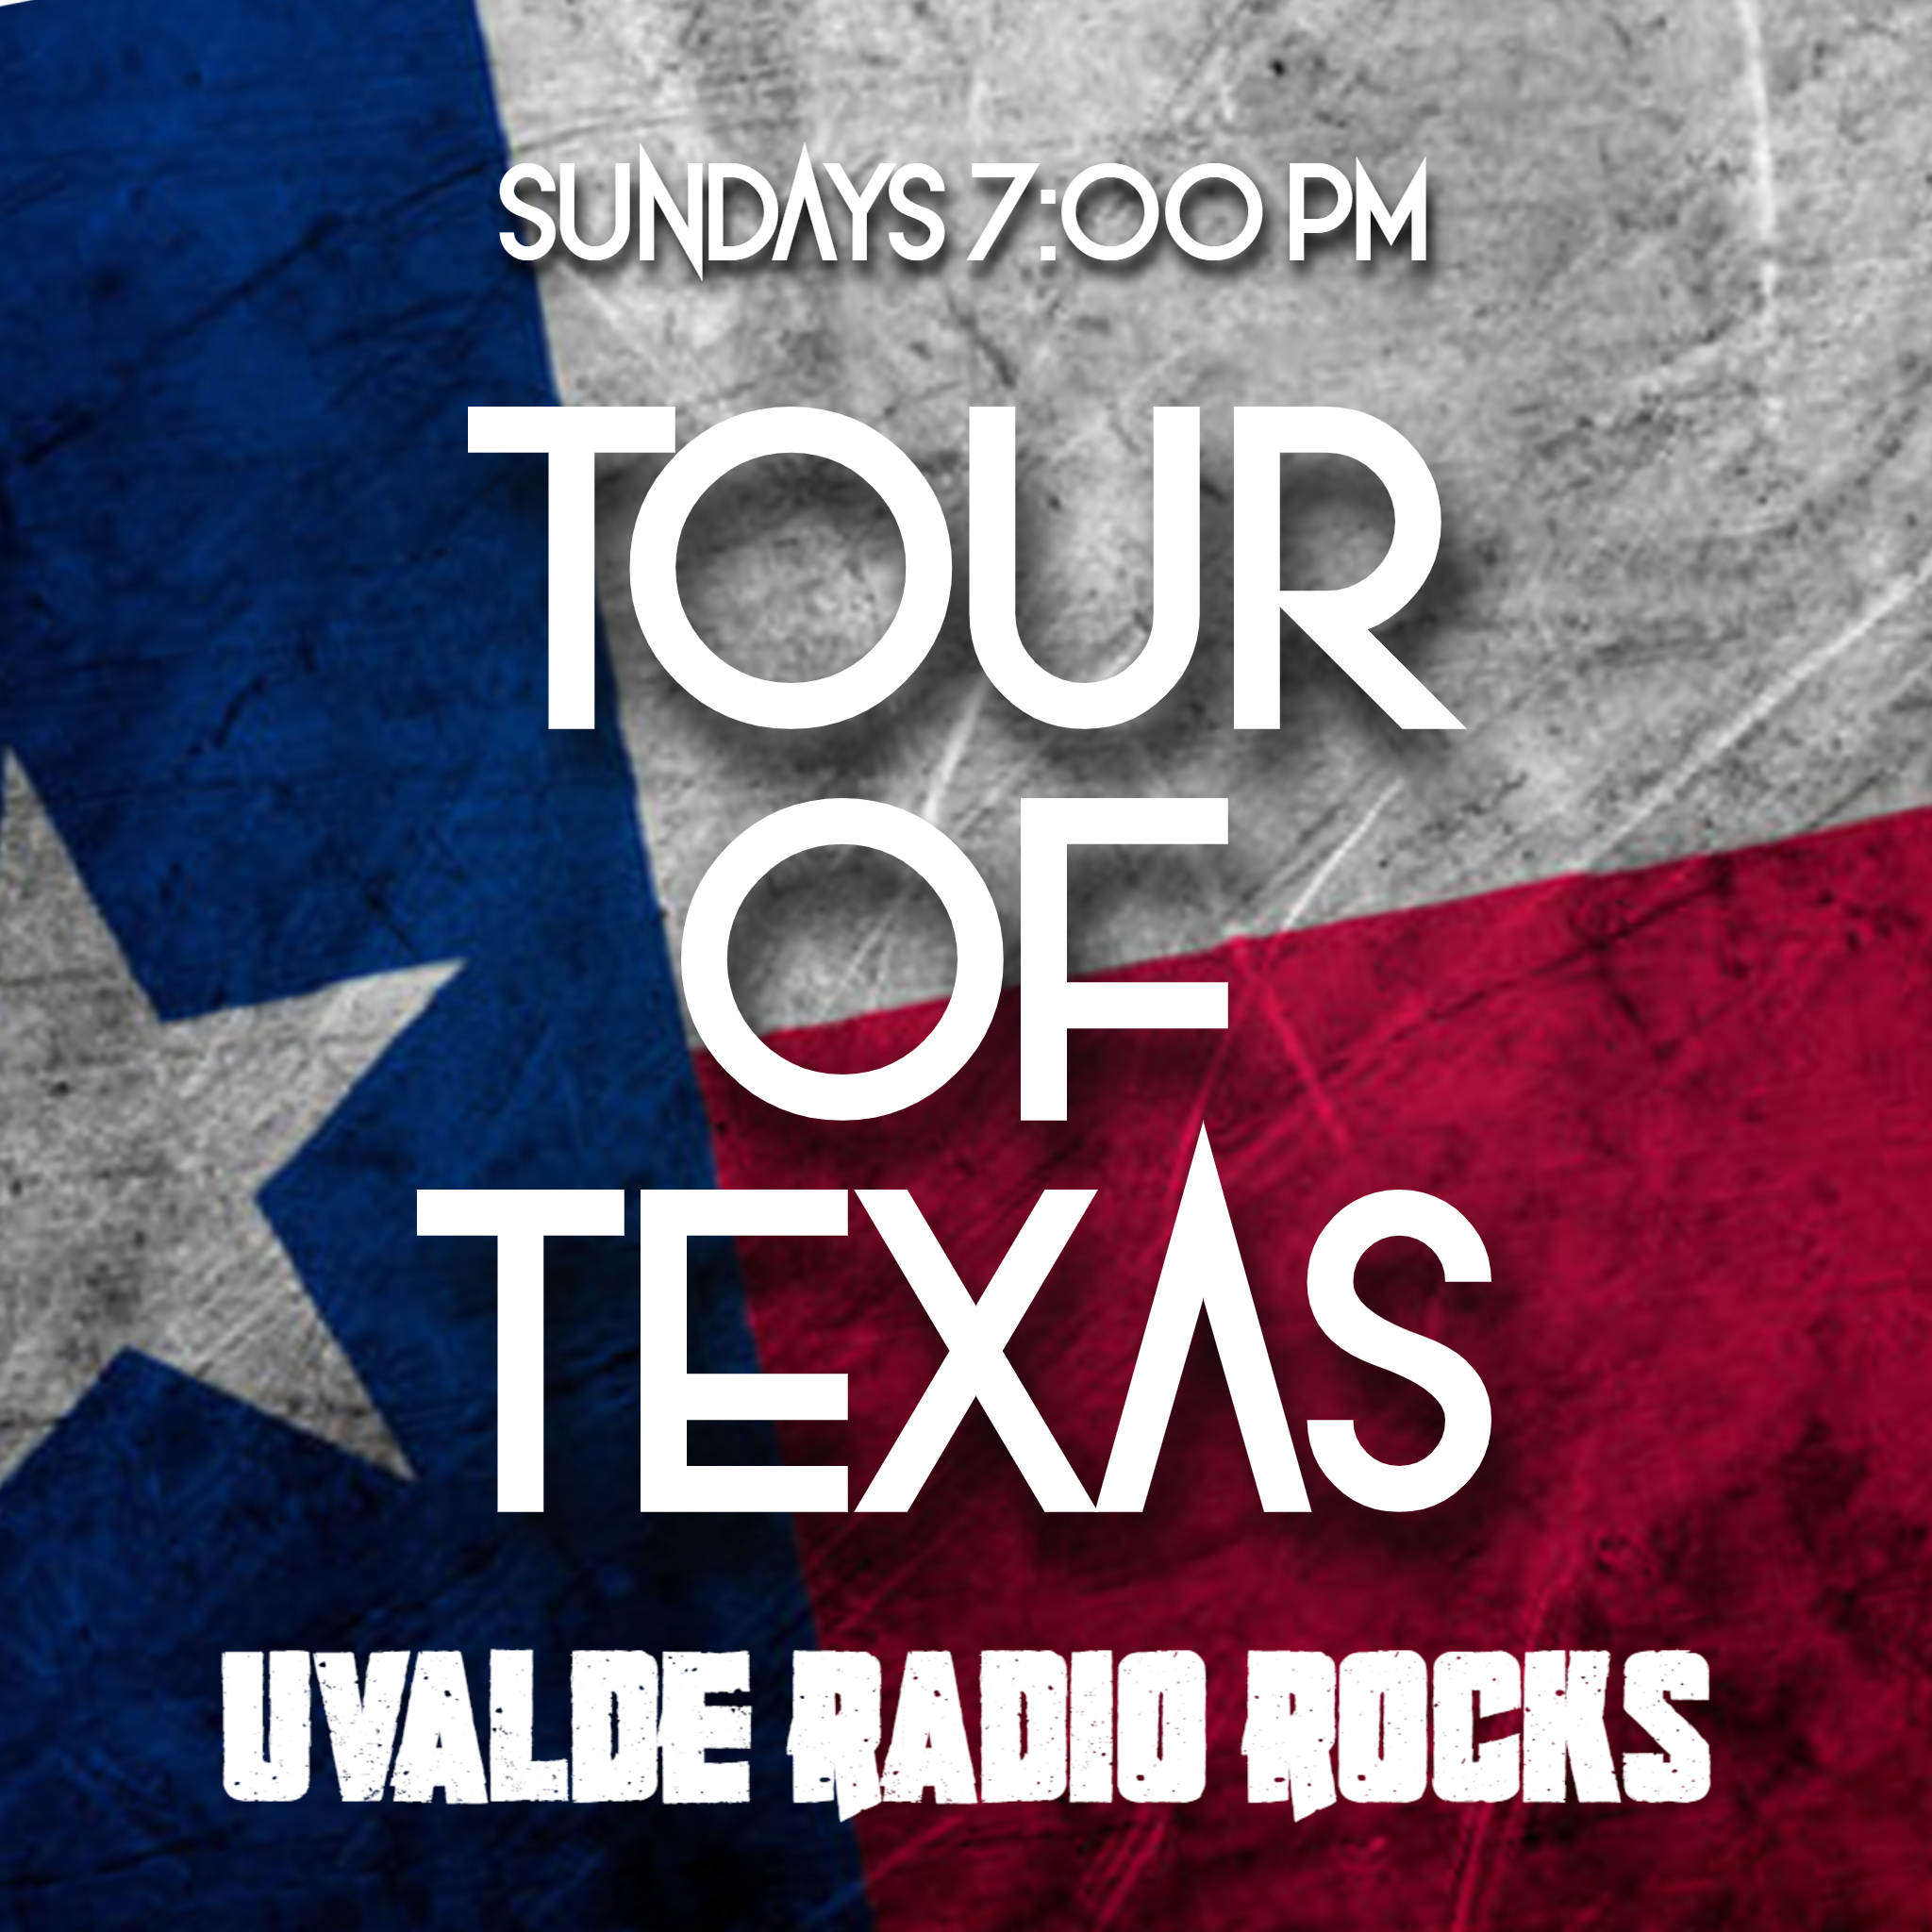 Art for Tour of Texas Promo by Sundays 7 pm